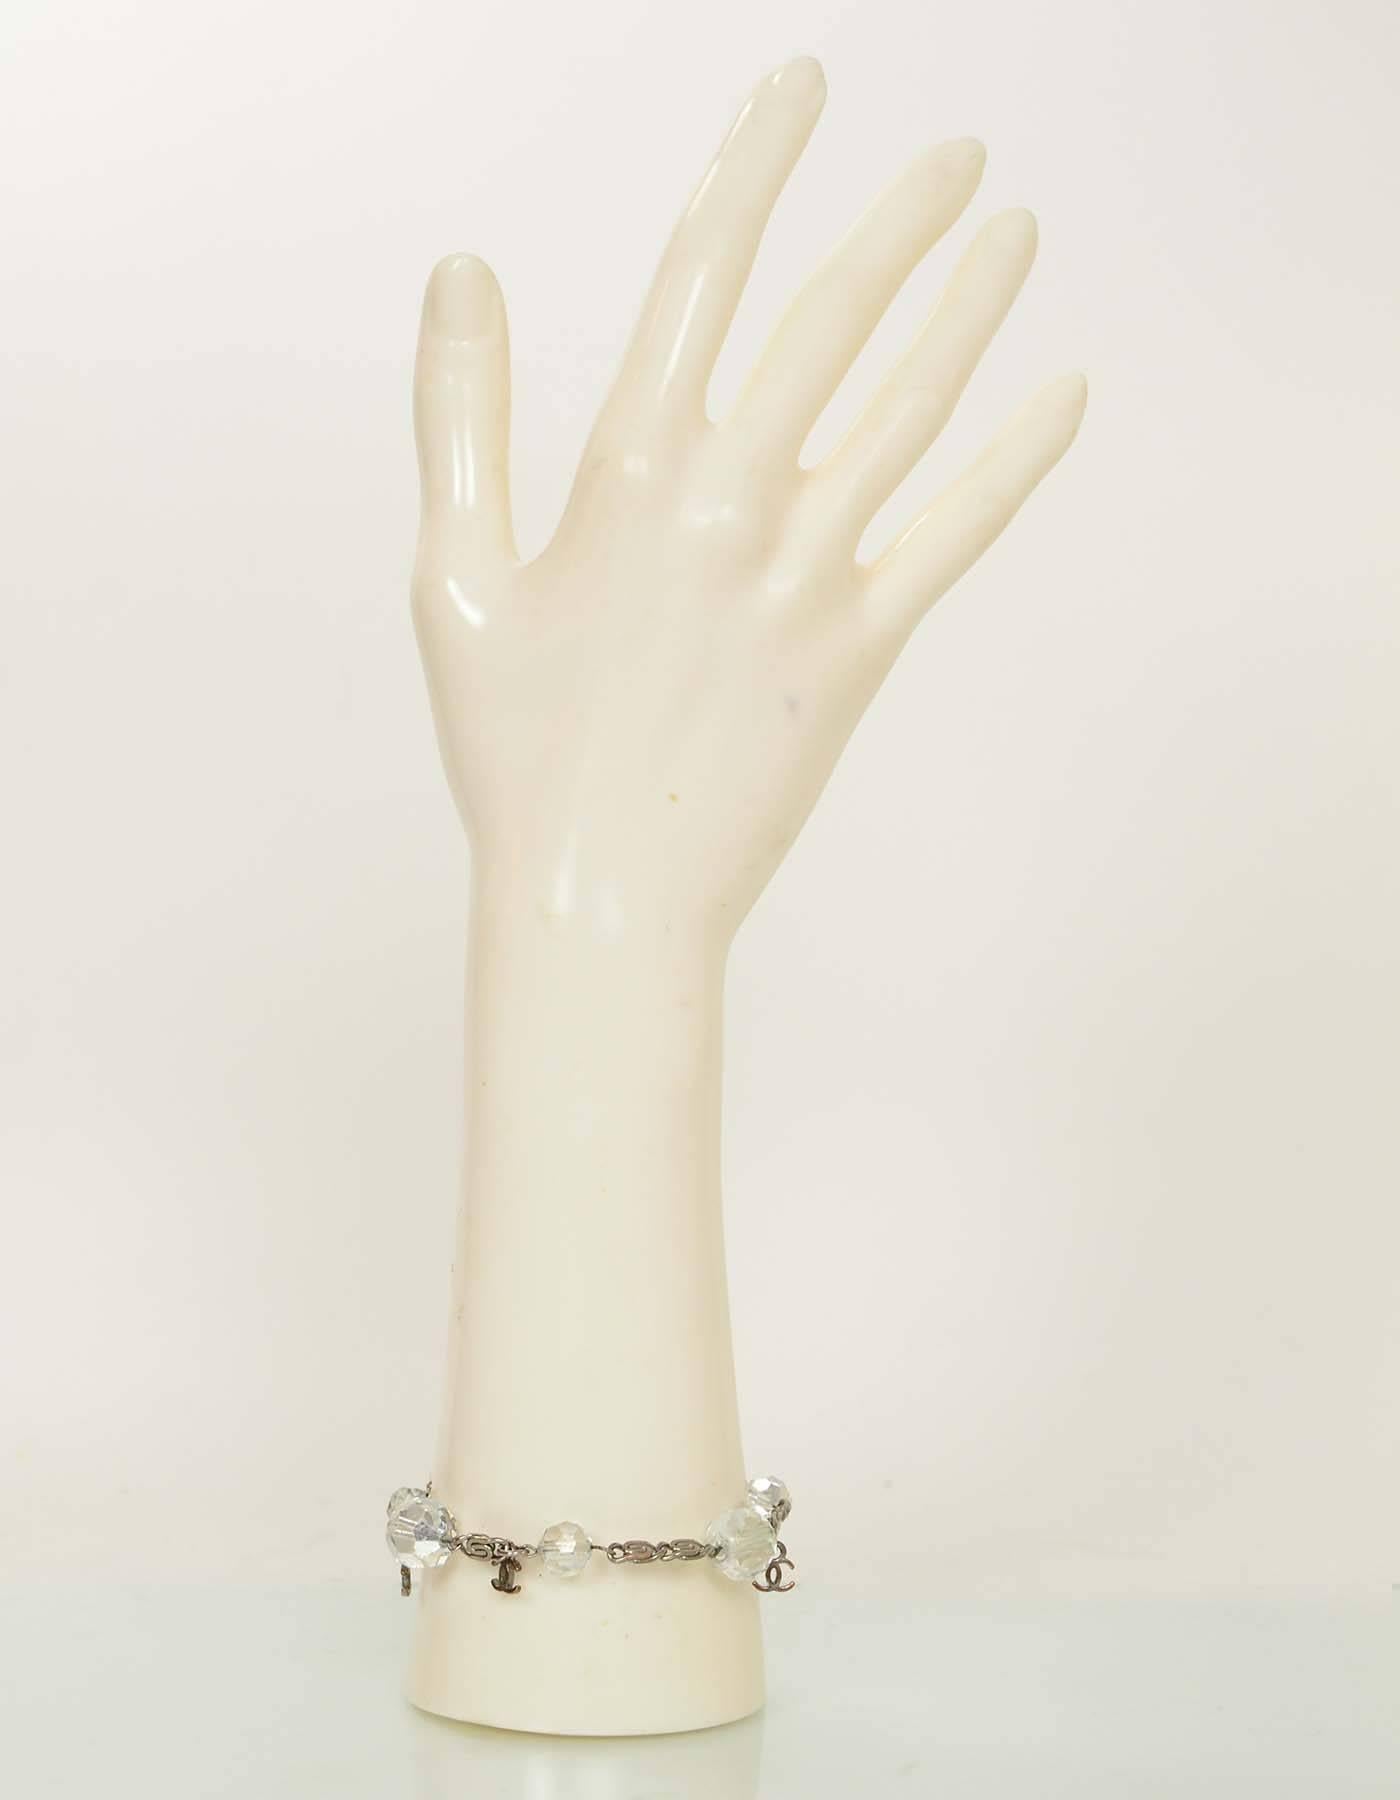 Chanel Clear Bead CC Bracelet

Made In: France
Production Year: 2000 Cruise
Stamp: Chanel 00 CC C made in france
Color: Clear, silver
Materials: Metal, resin
Closure: Lobster claw closure
Overall Condition: Very good pre-owned condition with